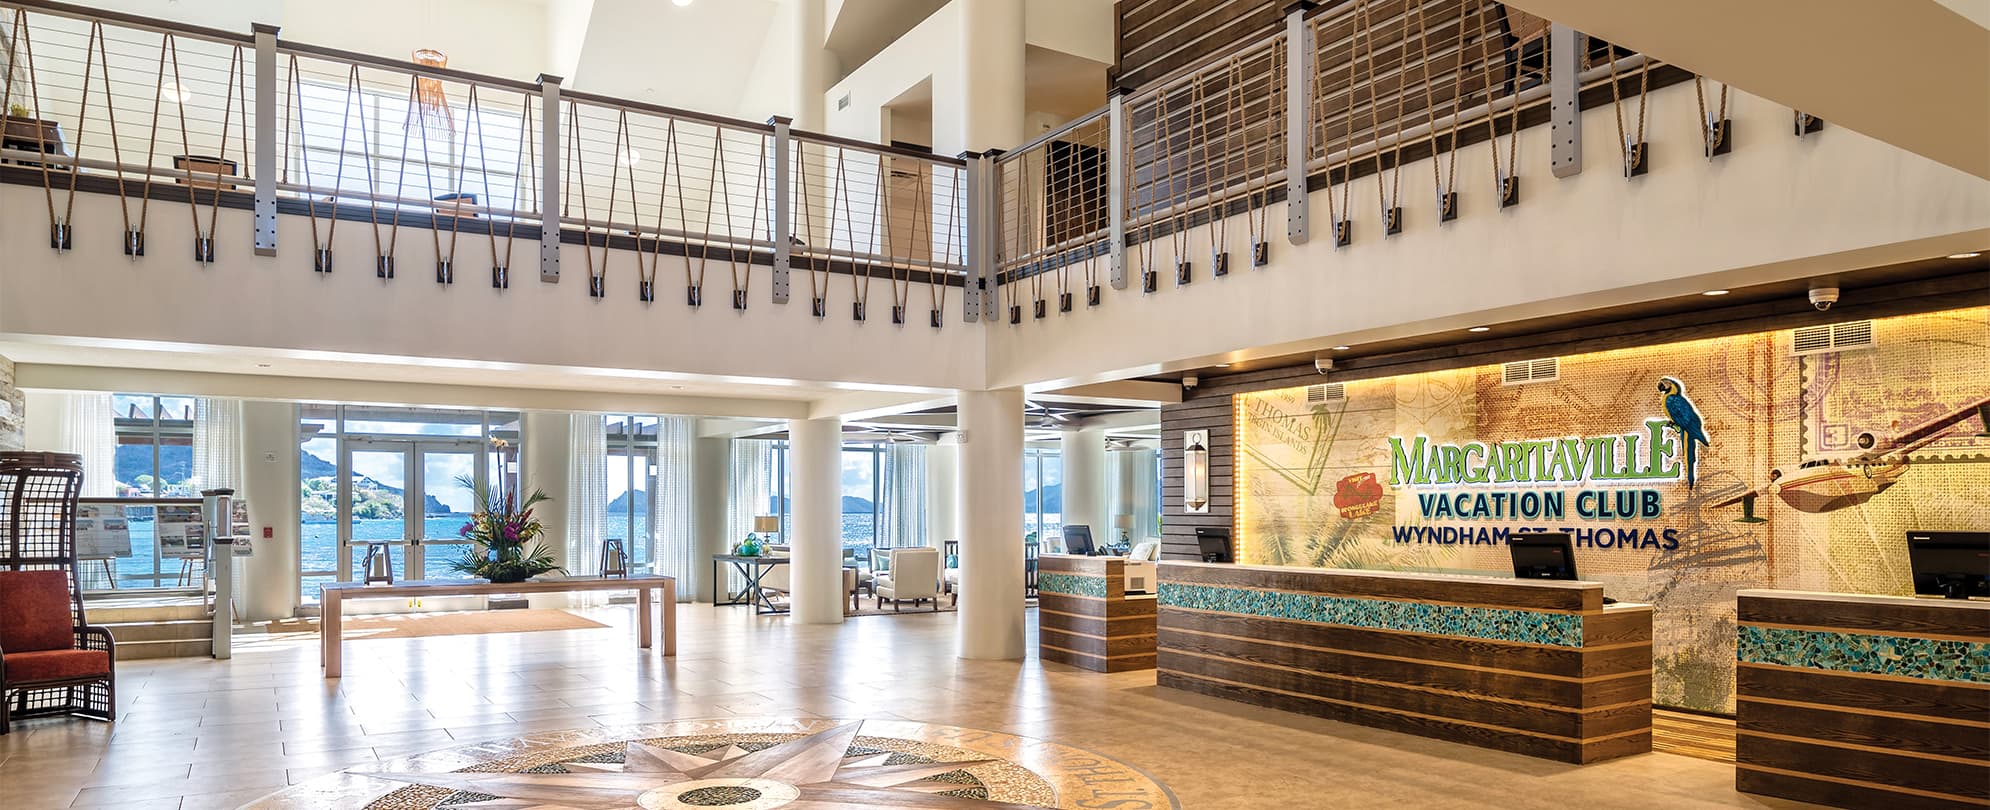 The lobby and check-in counters at Margaritaville Vacation Club